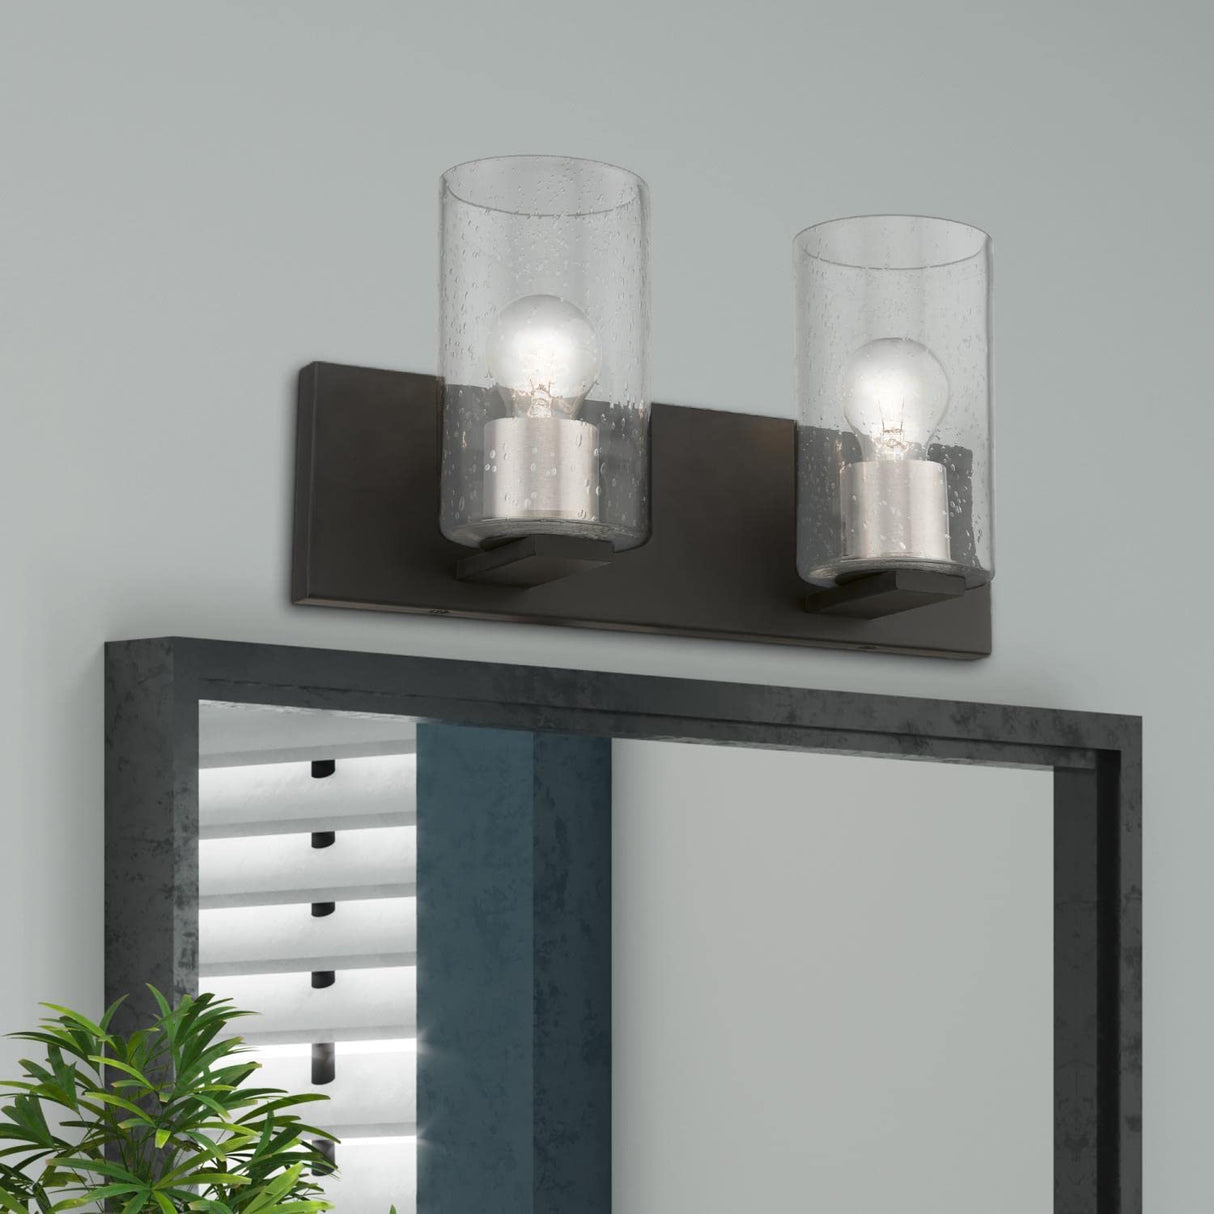 Livex Lighting 18472-04 Zurich - 2 Light Bath Vanity In Contemporary Style-7.75 Inches Tall and 15 Inches Wide, Zurich - 2 Light Bath Vanity In Contemporary Style-7.75 Inches Tall and 15 Inches Wide